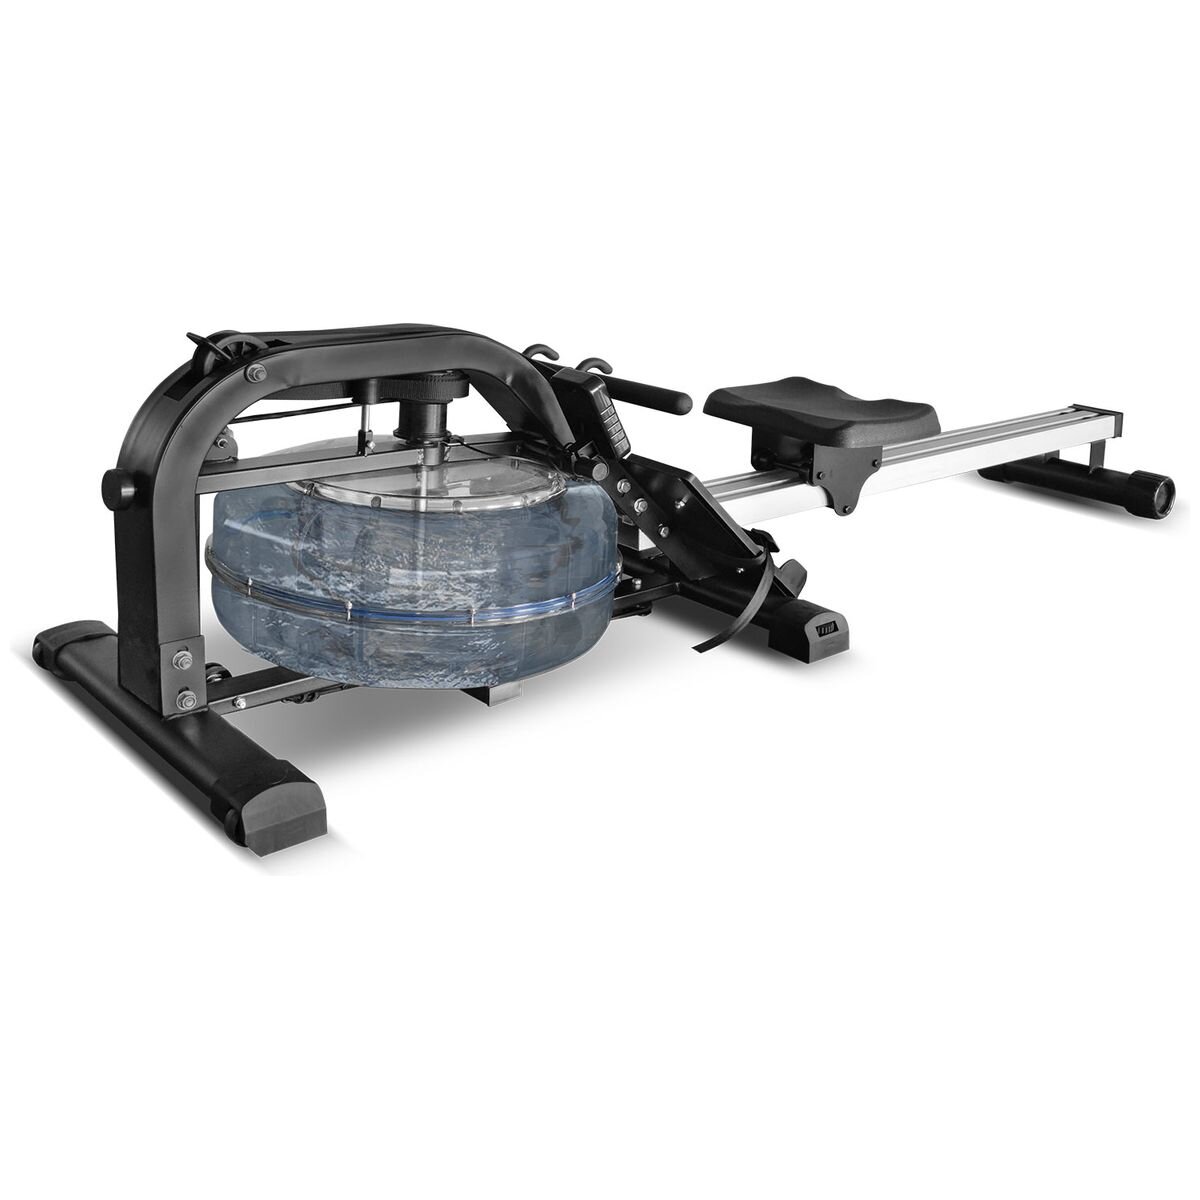 Lifespan Fitness ROWER-700 Water Resistance Rowing Machine Appliances Online